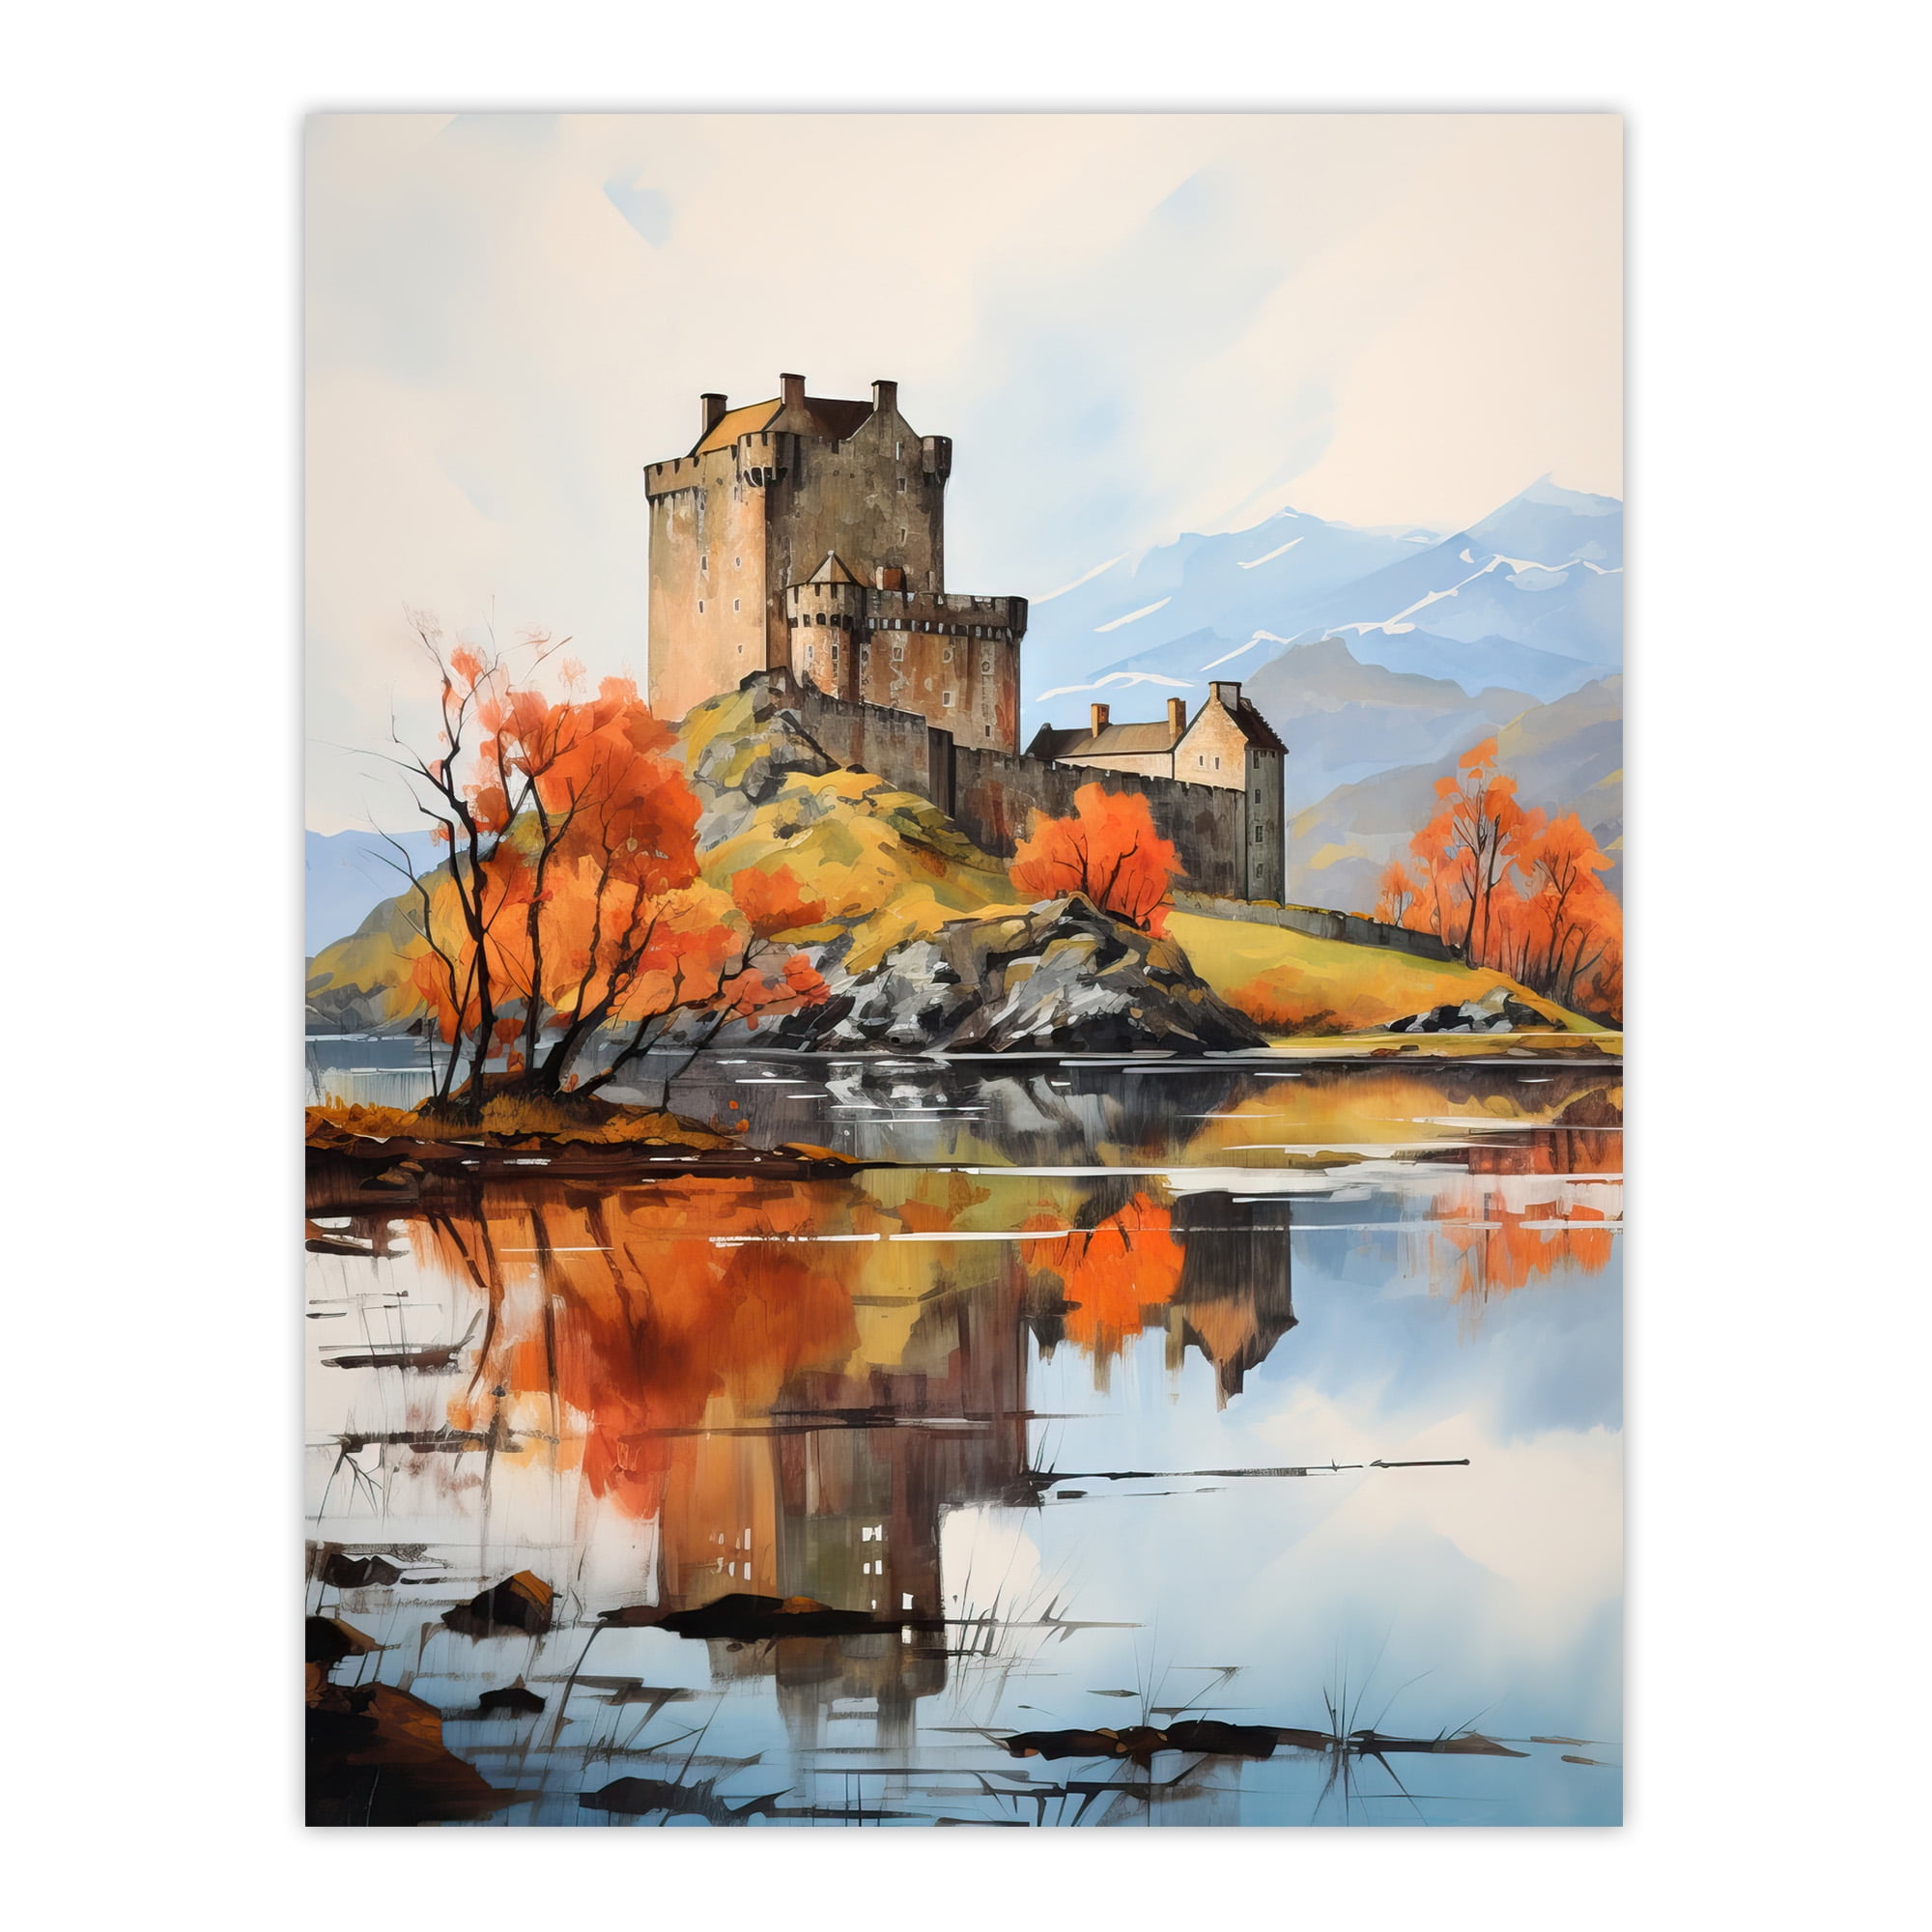 Thick Eilean Misty Scotland Painting Large Castle Inch Poster Watercolour Print Morning Sunlight Donan Art 18X24 Wall Autumn Paper